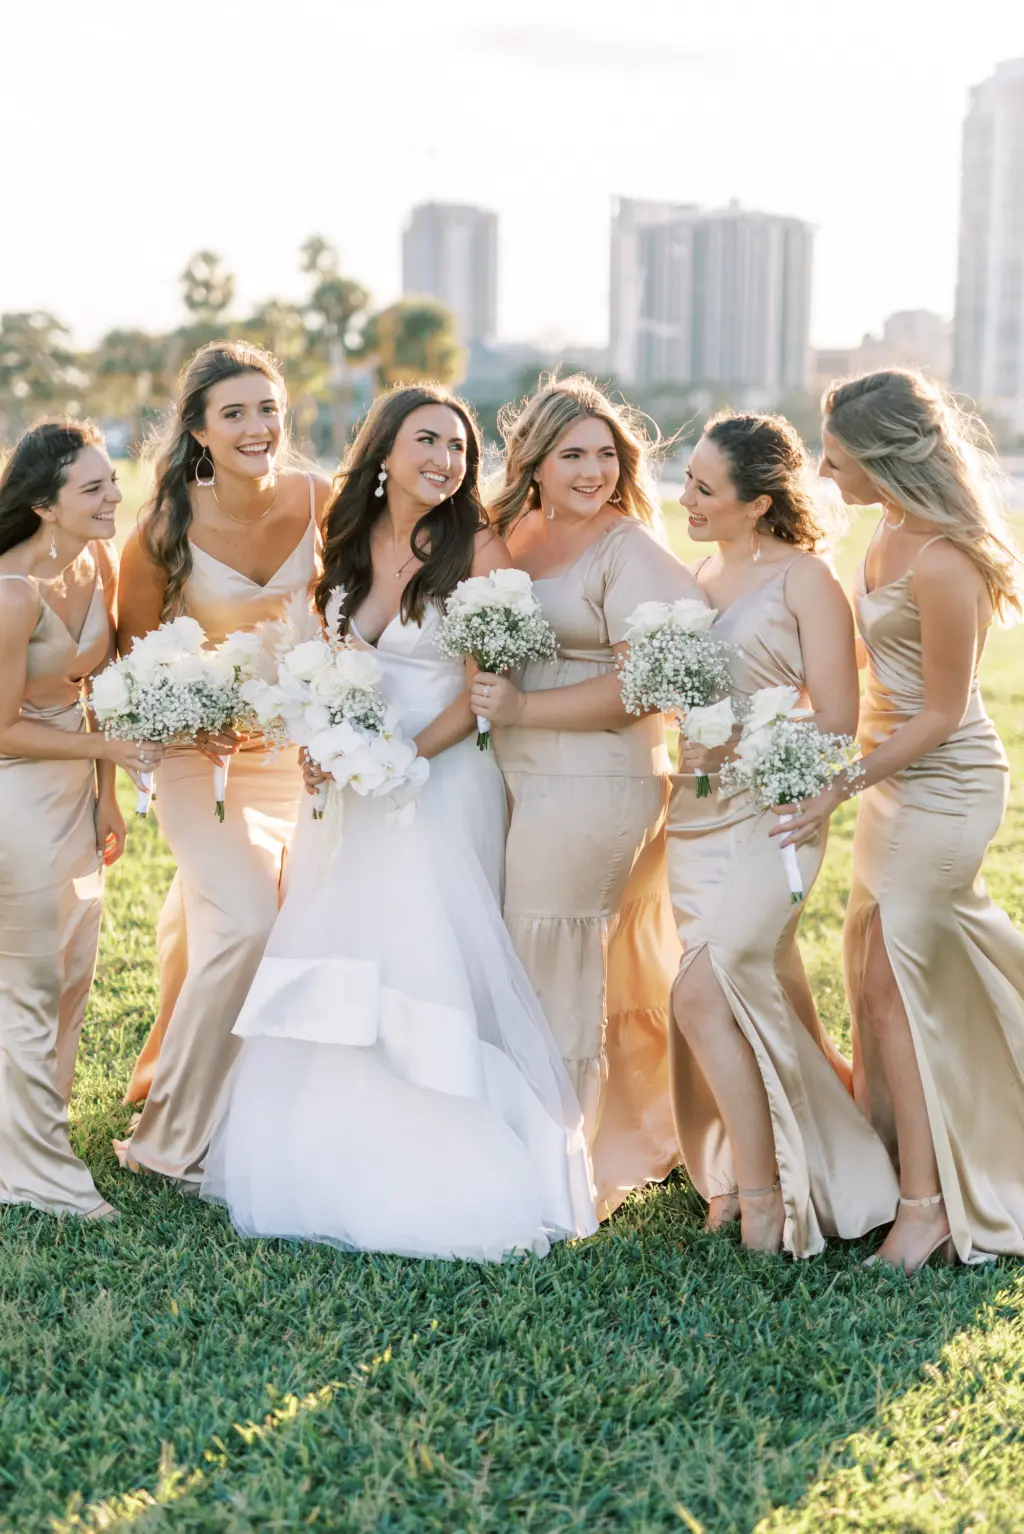 Mismatched Satin Champagne Bridesmaids Wedding Dress Inspiration | Ivory White and Cream Roses and Baby's Breath Bouquets